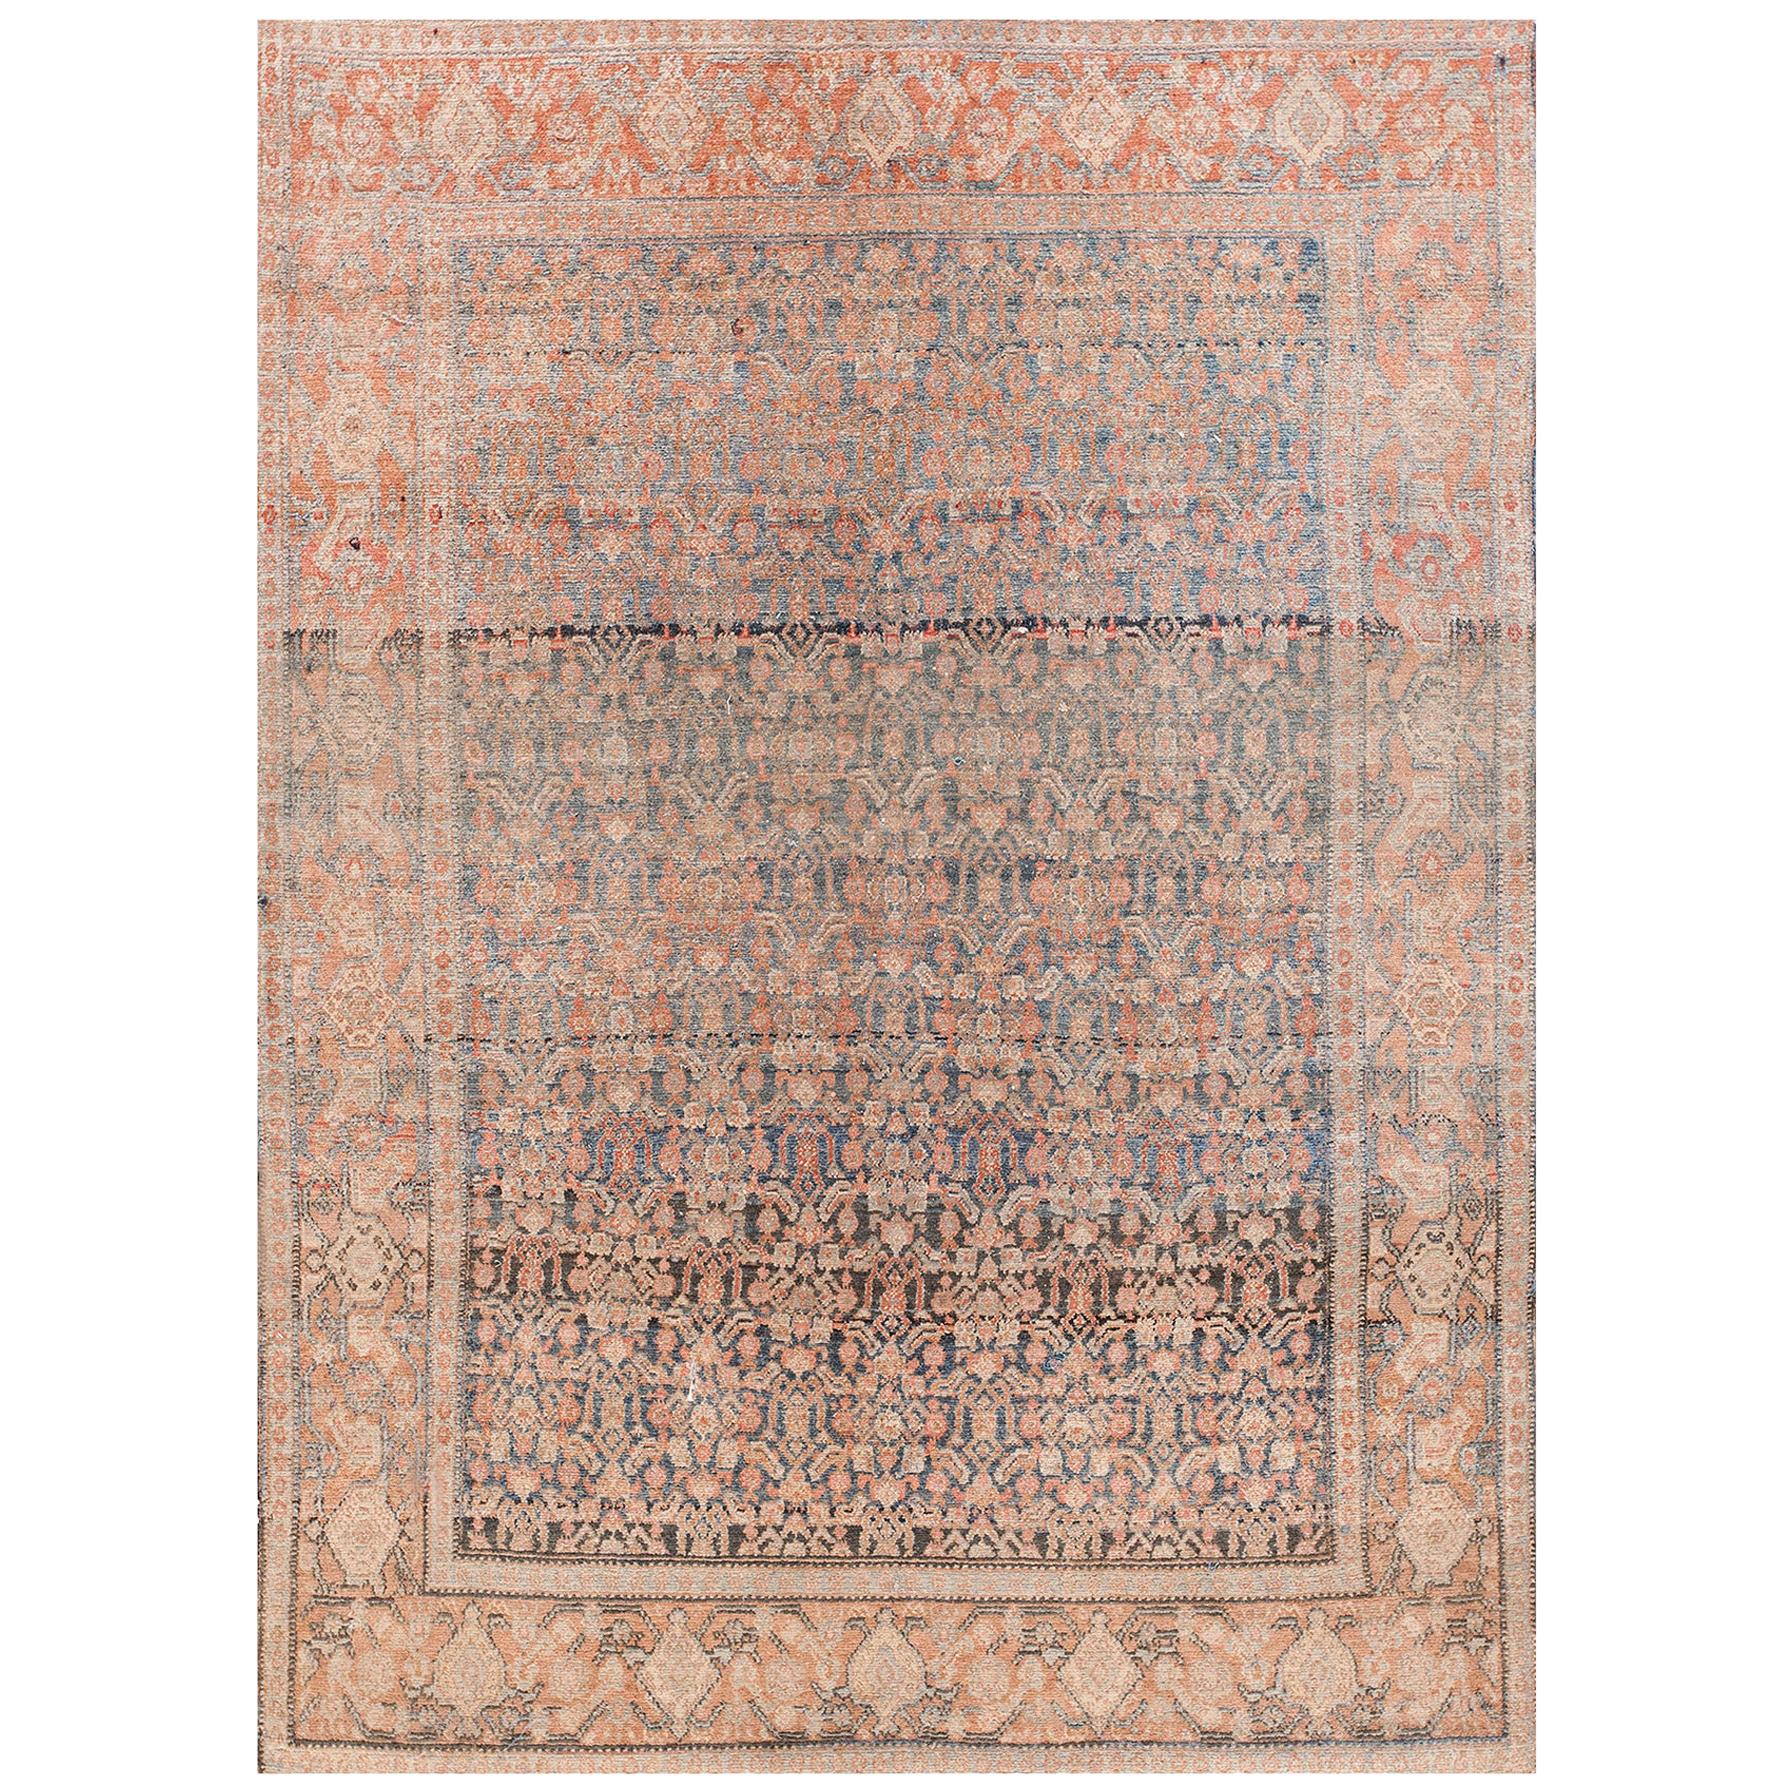 Late 19th Century W. Persian Senneh Carpet ( 4'7" x 6'6" - 139 x 198 ) For Sale